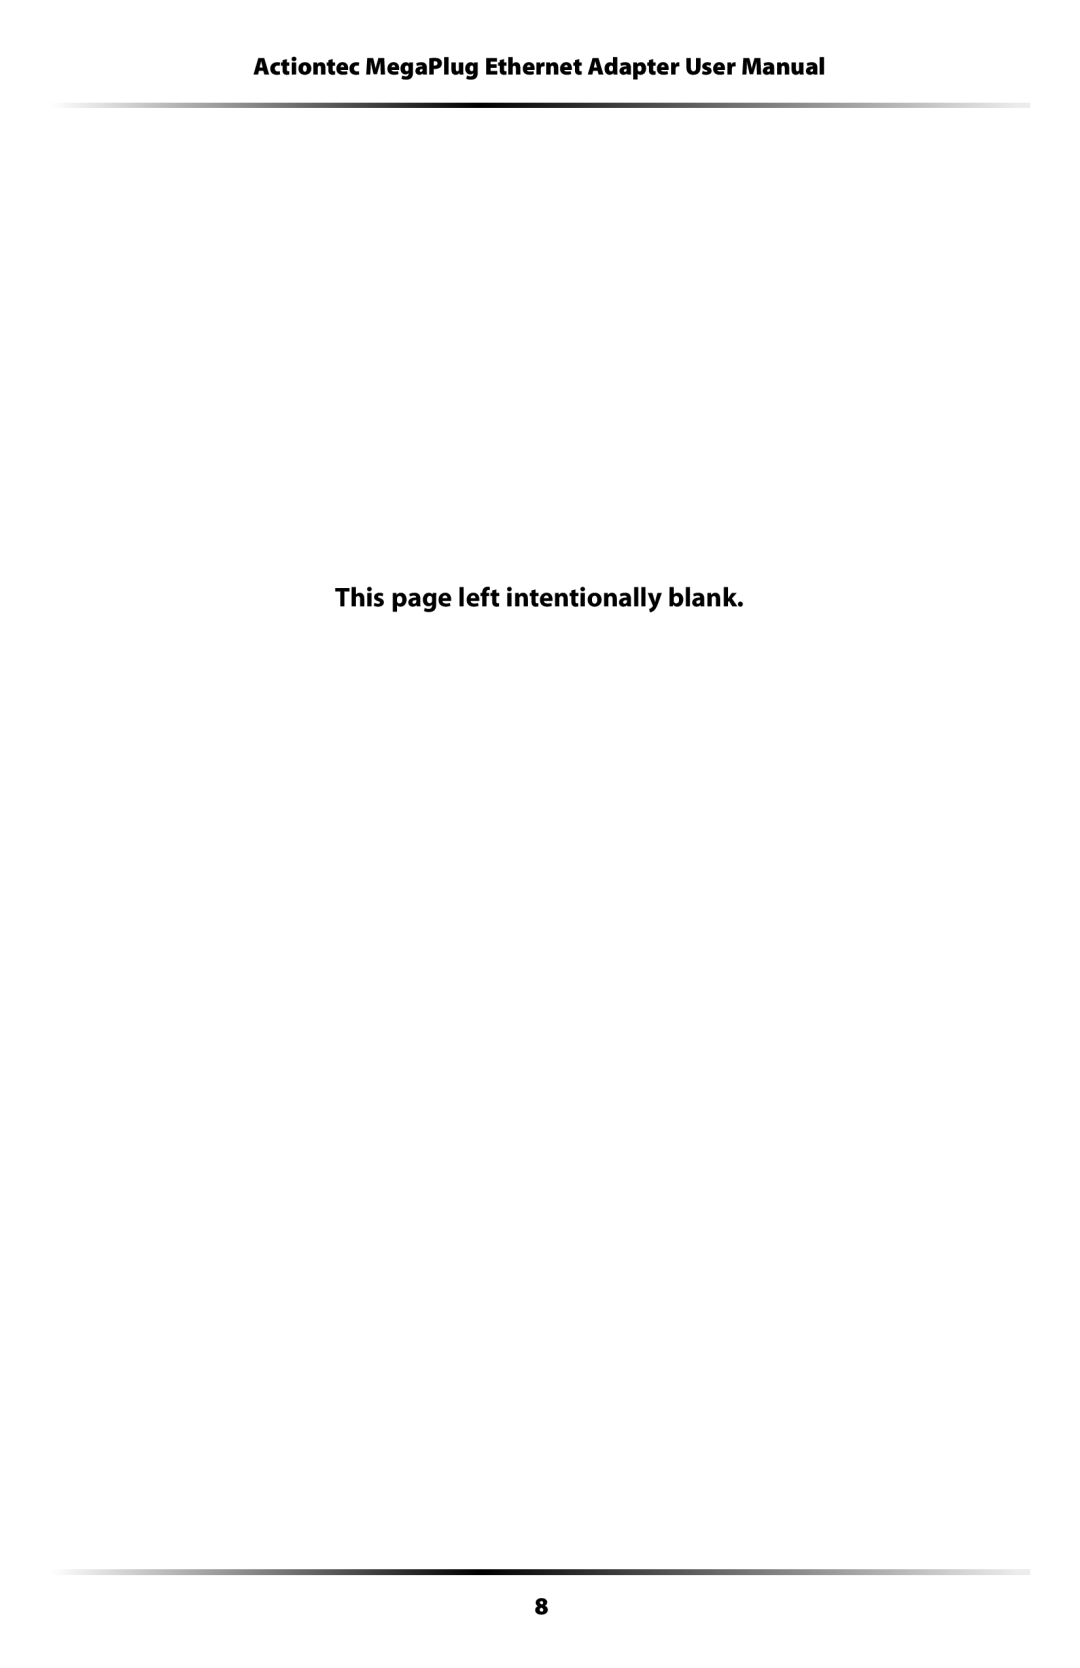 Actiontec electronic HPE100T user manual This page left intentionally blank 